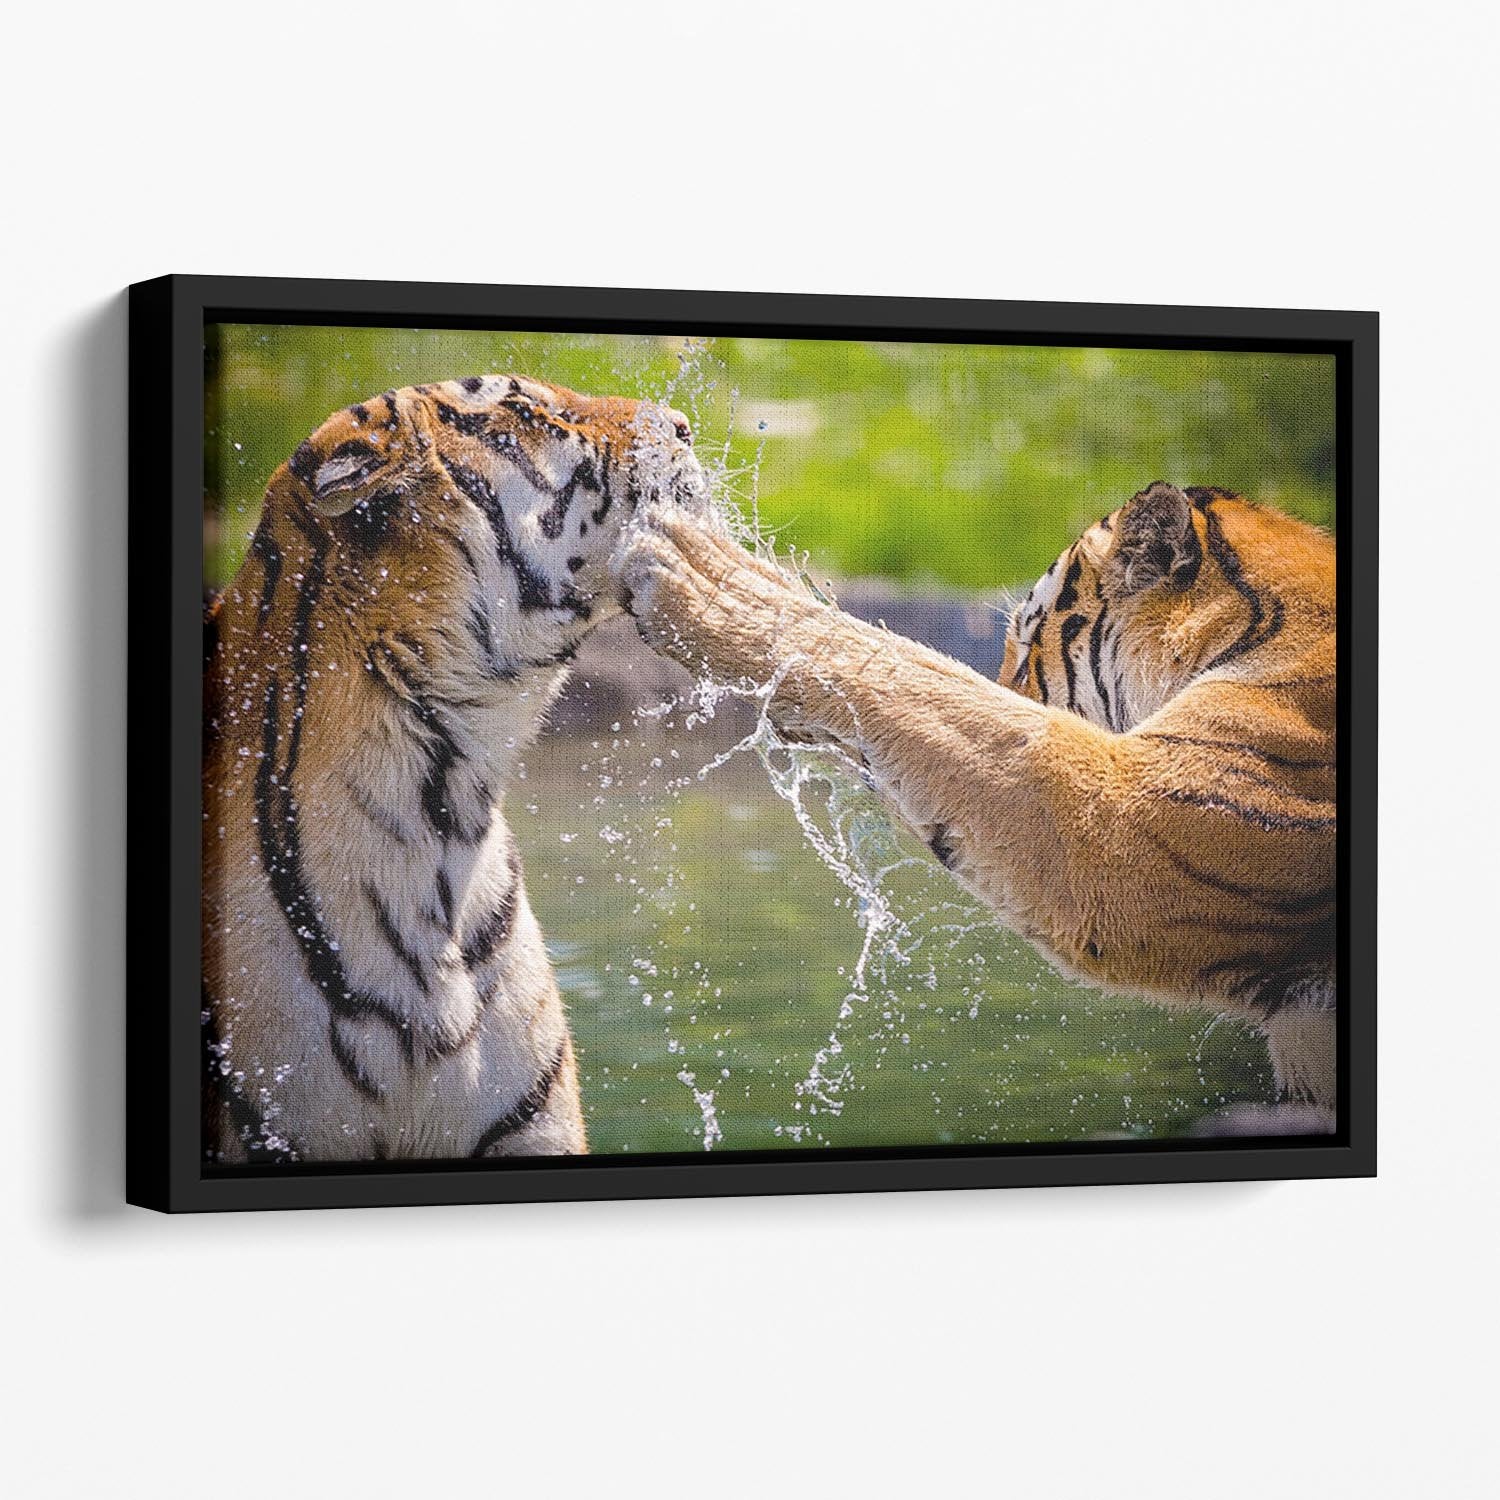 Two adult tigers at play in the water Floating Framed Canvas - Canvas Art Rocks - 1